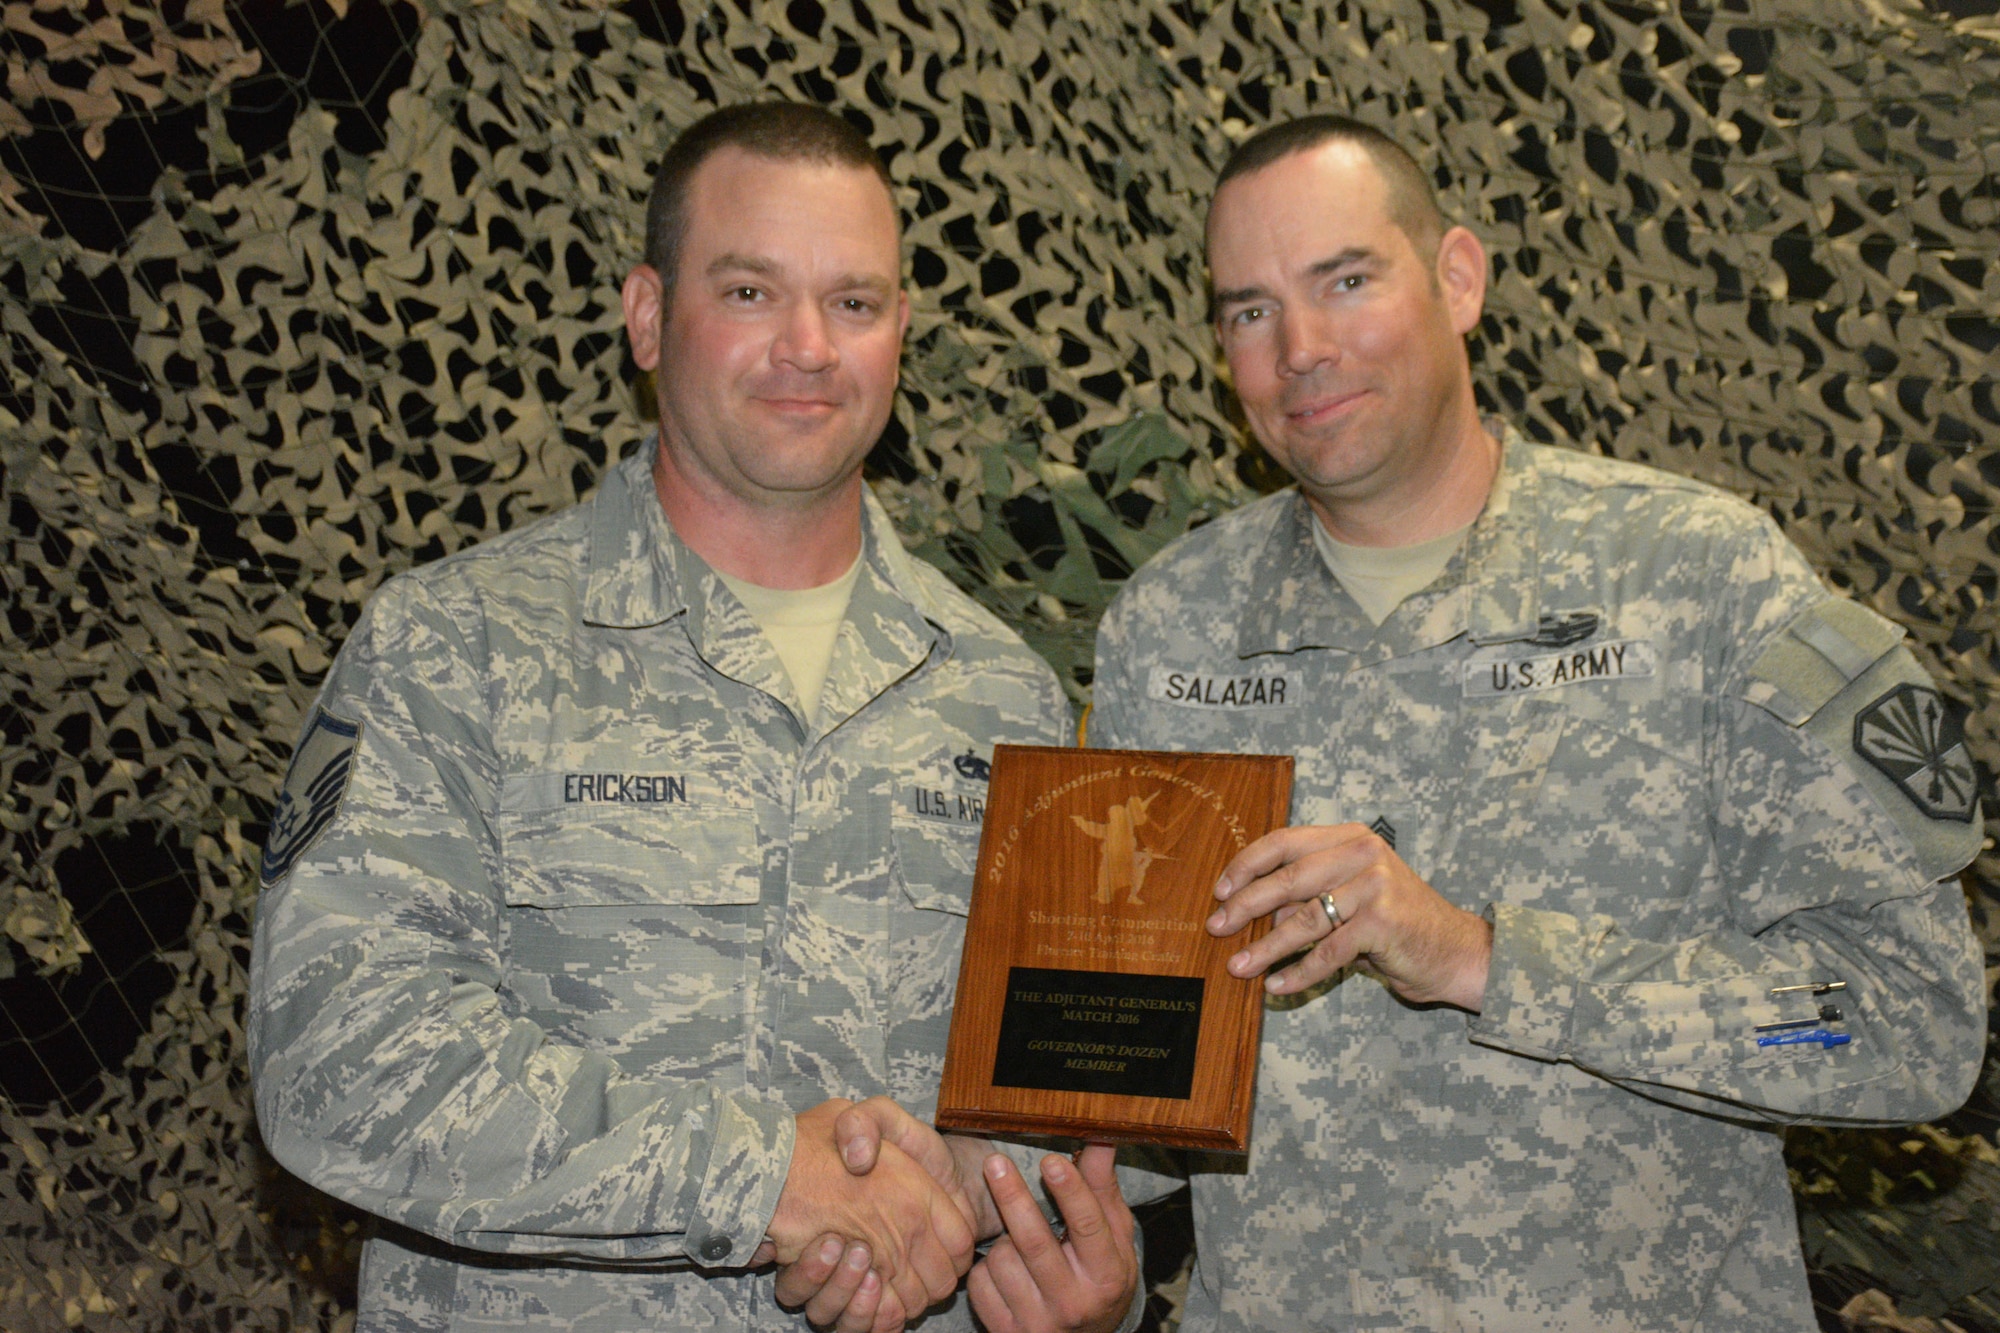 Master Sgt. Scott Erickson of the 161st Air Refueling Wing and Command Sgt. Maj. John Salazar of the Arizona Army National Guard’s Recruiting and Retention Battalion, were recognized as the top marksmen during 2016’s The Adjutant General’s Match. Hosted by the Arizona Army National Guard’s Small Arms Training Branch at the Florence Military Reservation, this four-day, eight event shooting competition featured 67 Guardsmen from the Arizona Army and Air National Guard. The top 12 shooters were awarded the Governor’s dozen tab and have the opportunity to compete at the regional and national levels. (U.S. Army National Guard photo by Sgt. 1st Class Monette Wesolek)